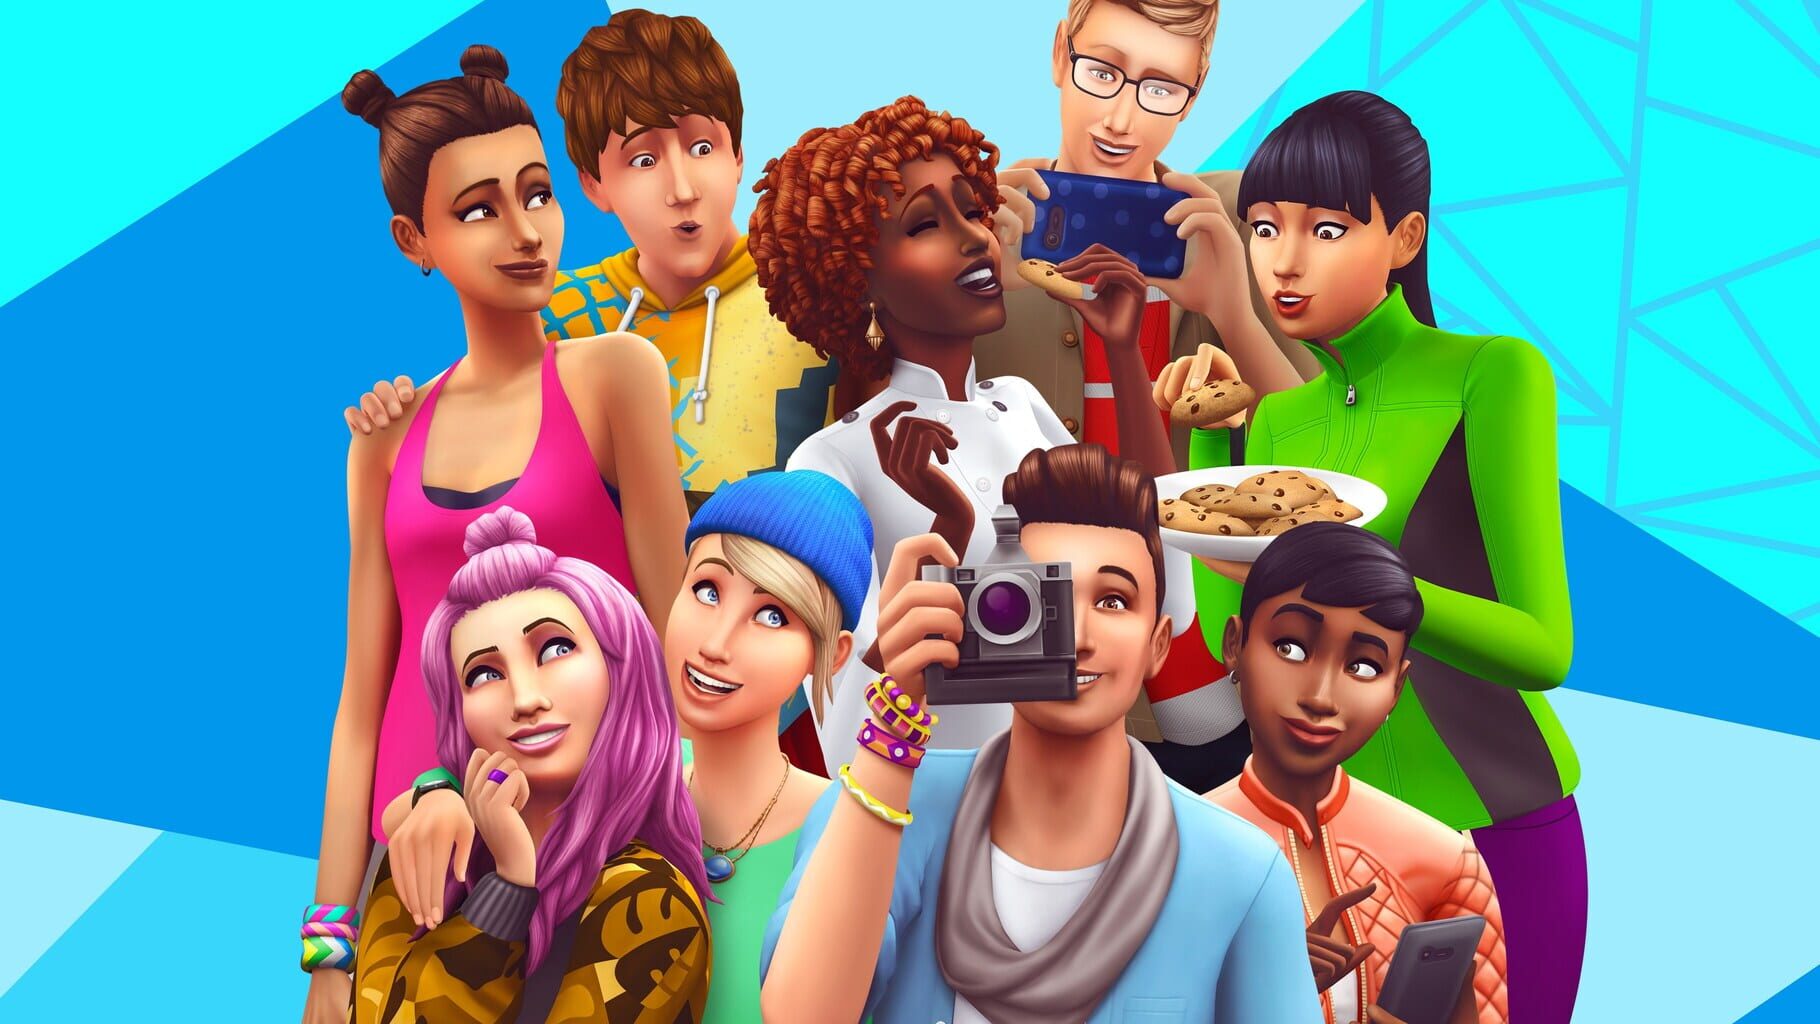 Arte - The Sims 4: Deluxe Party Edition